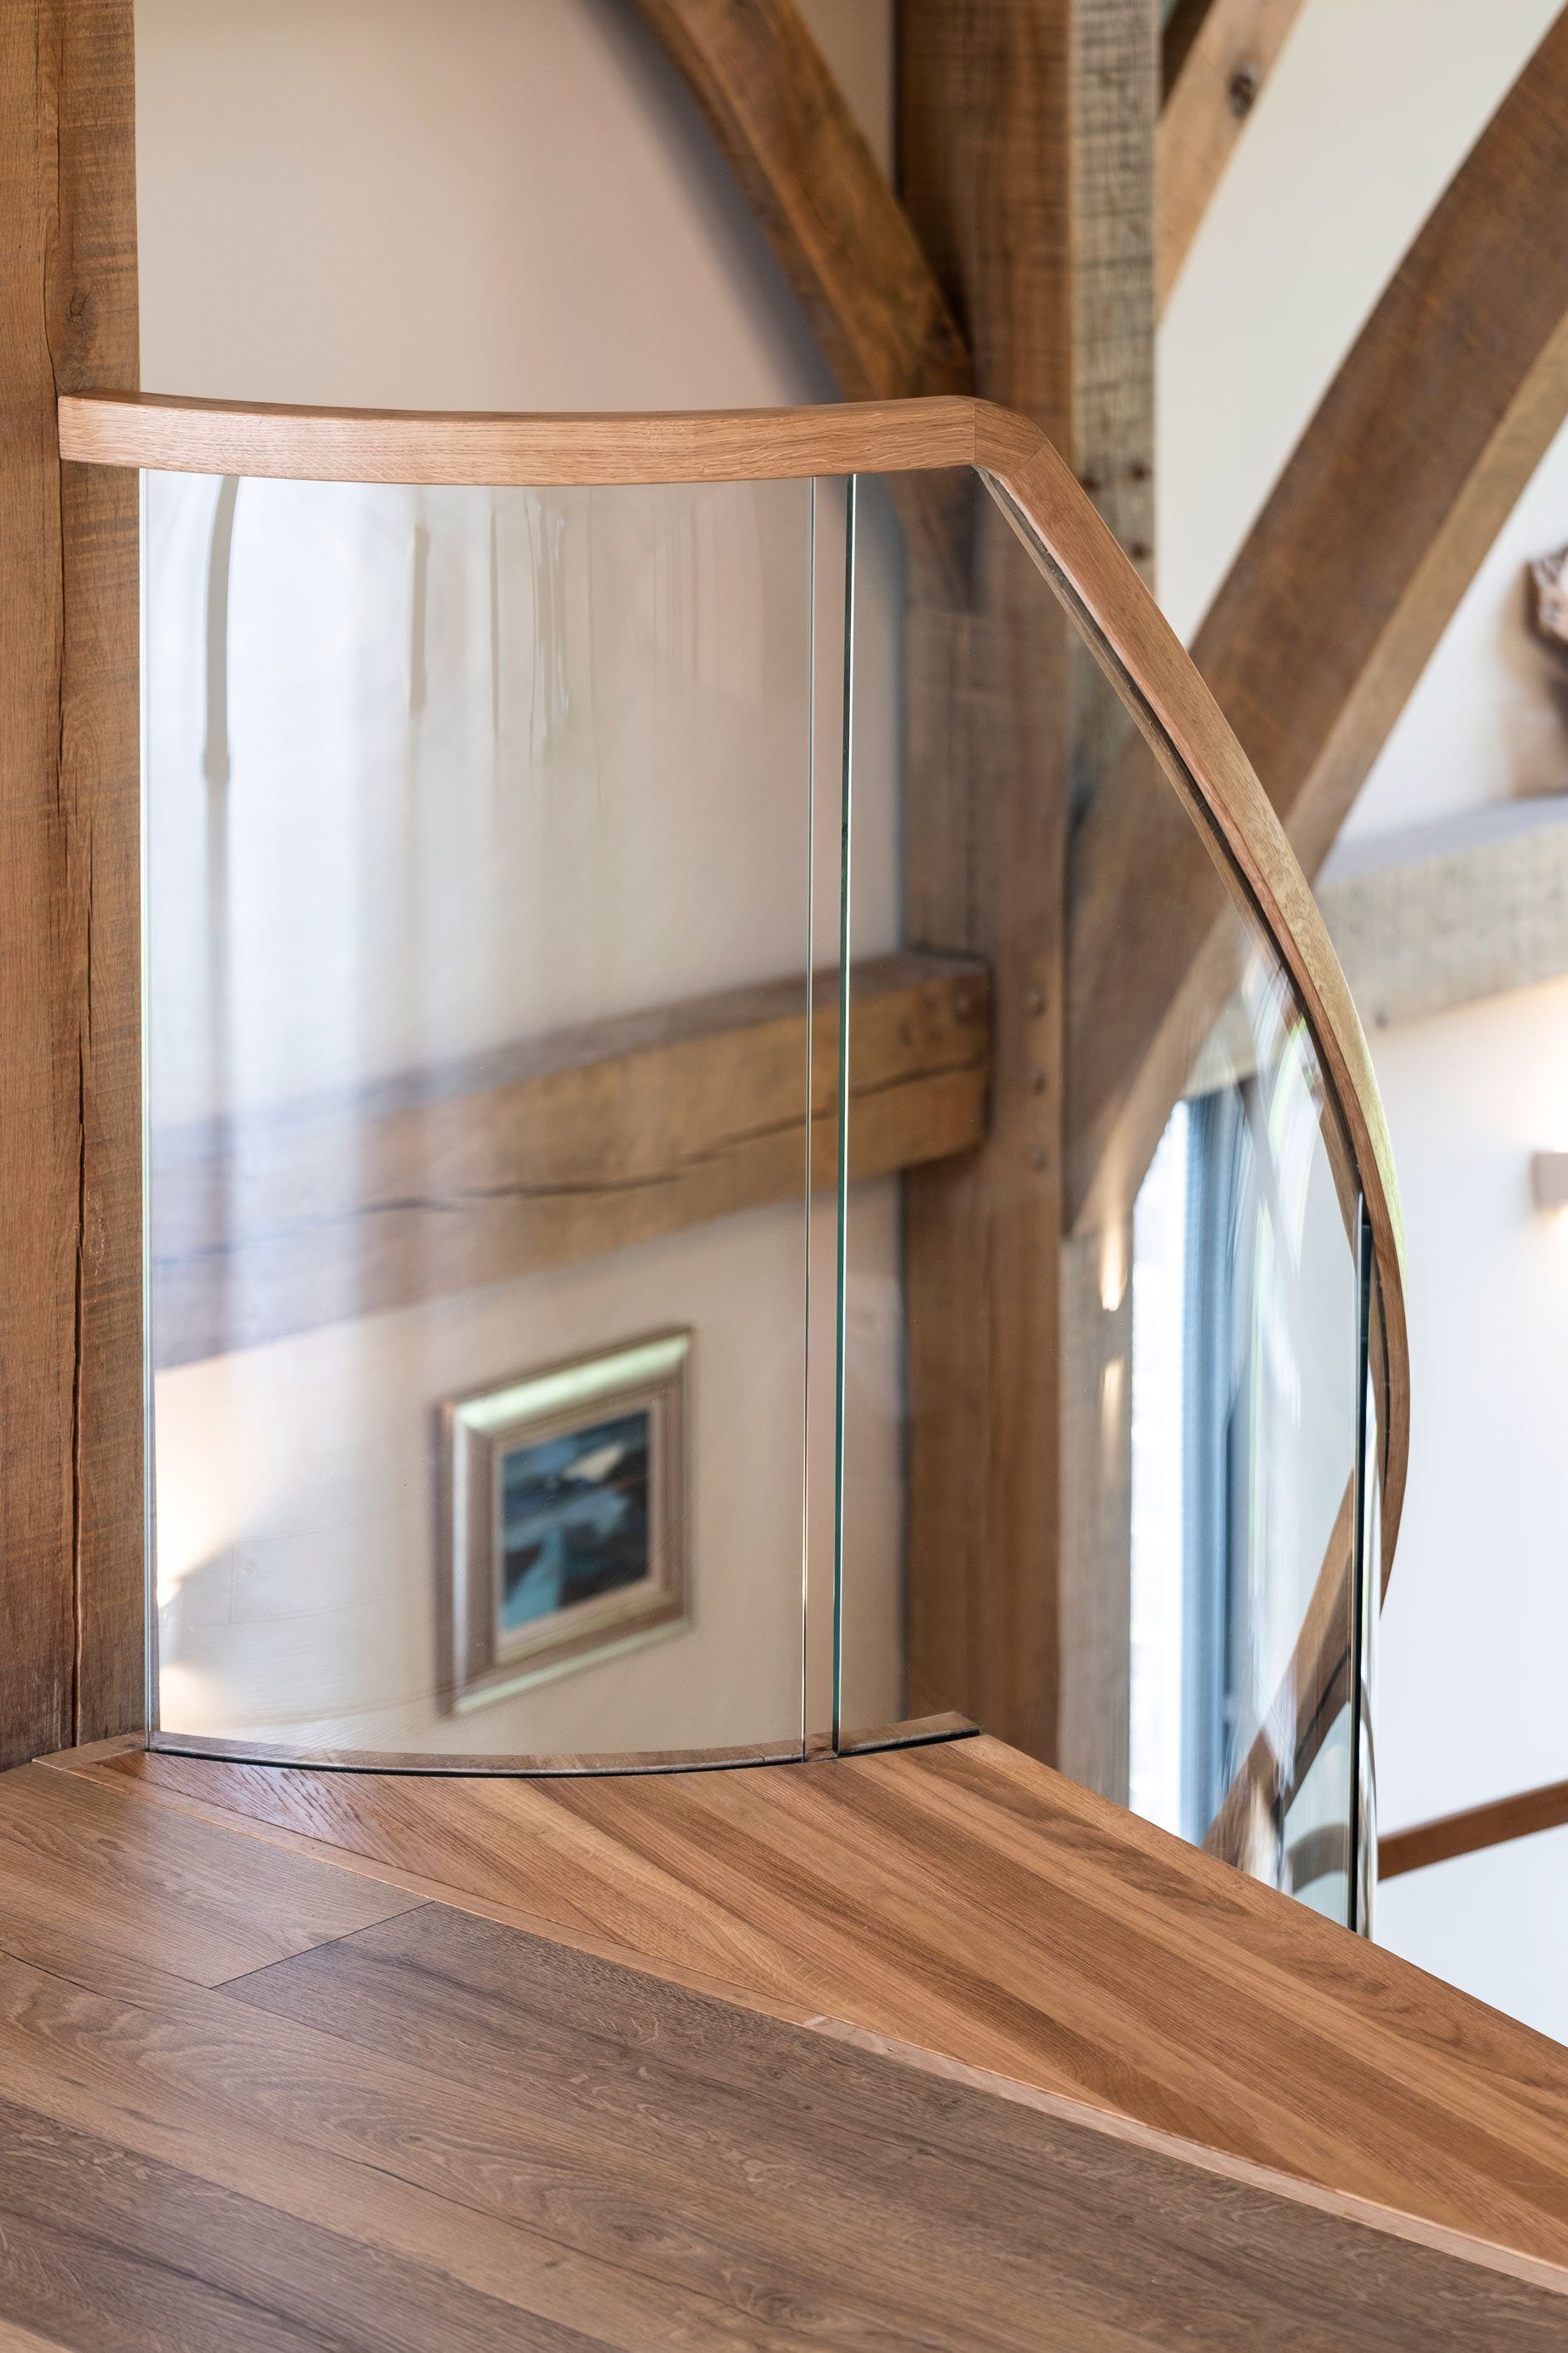 Curved oak staircase centrepiece with curved glass in green oak framed, modern home.